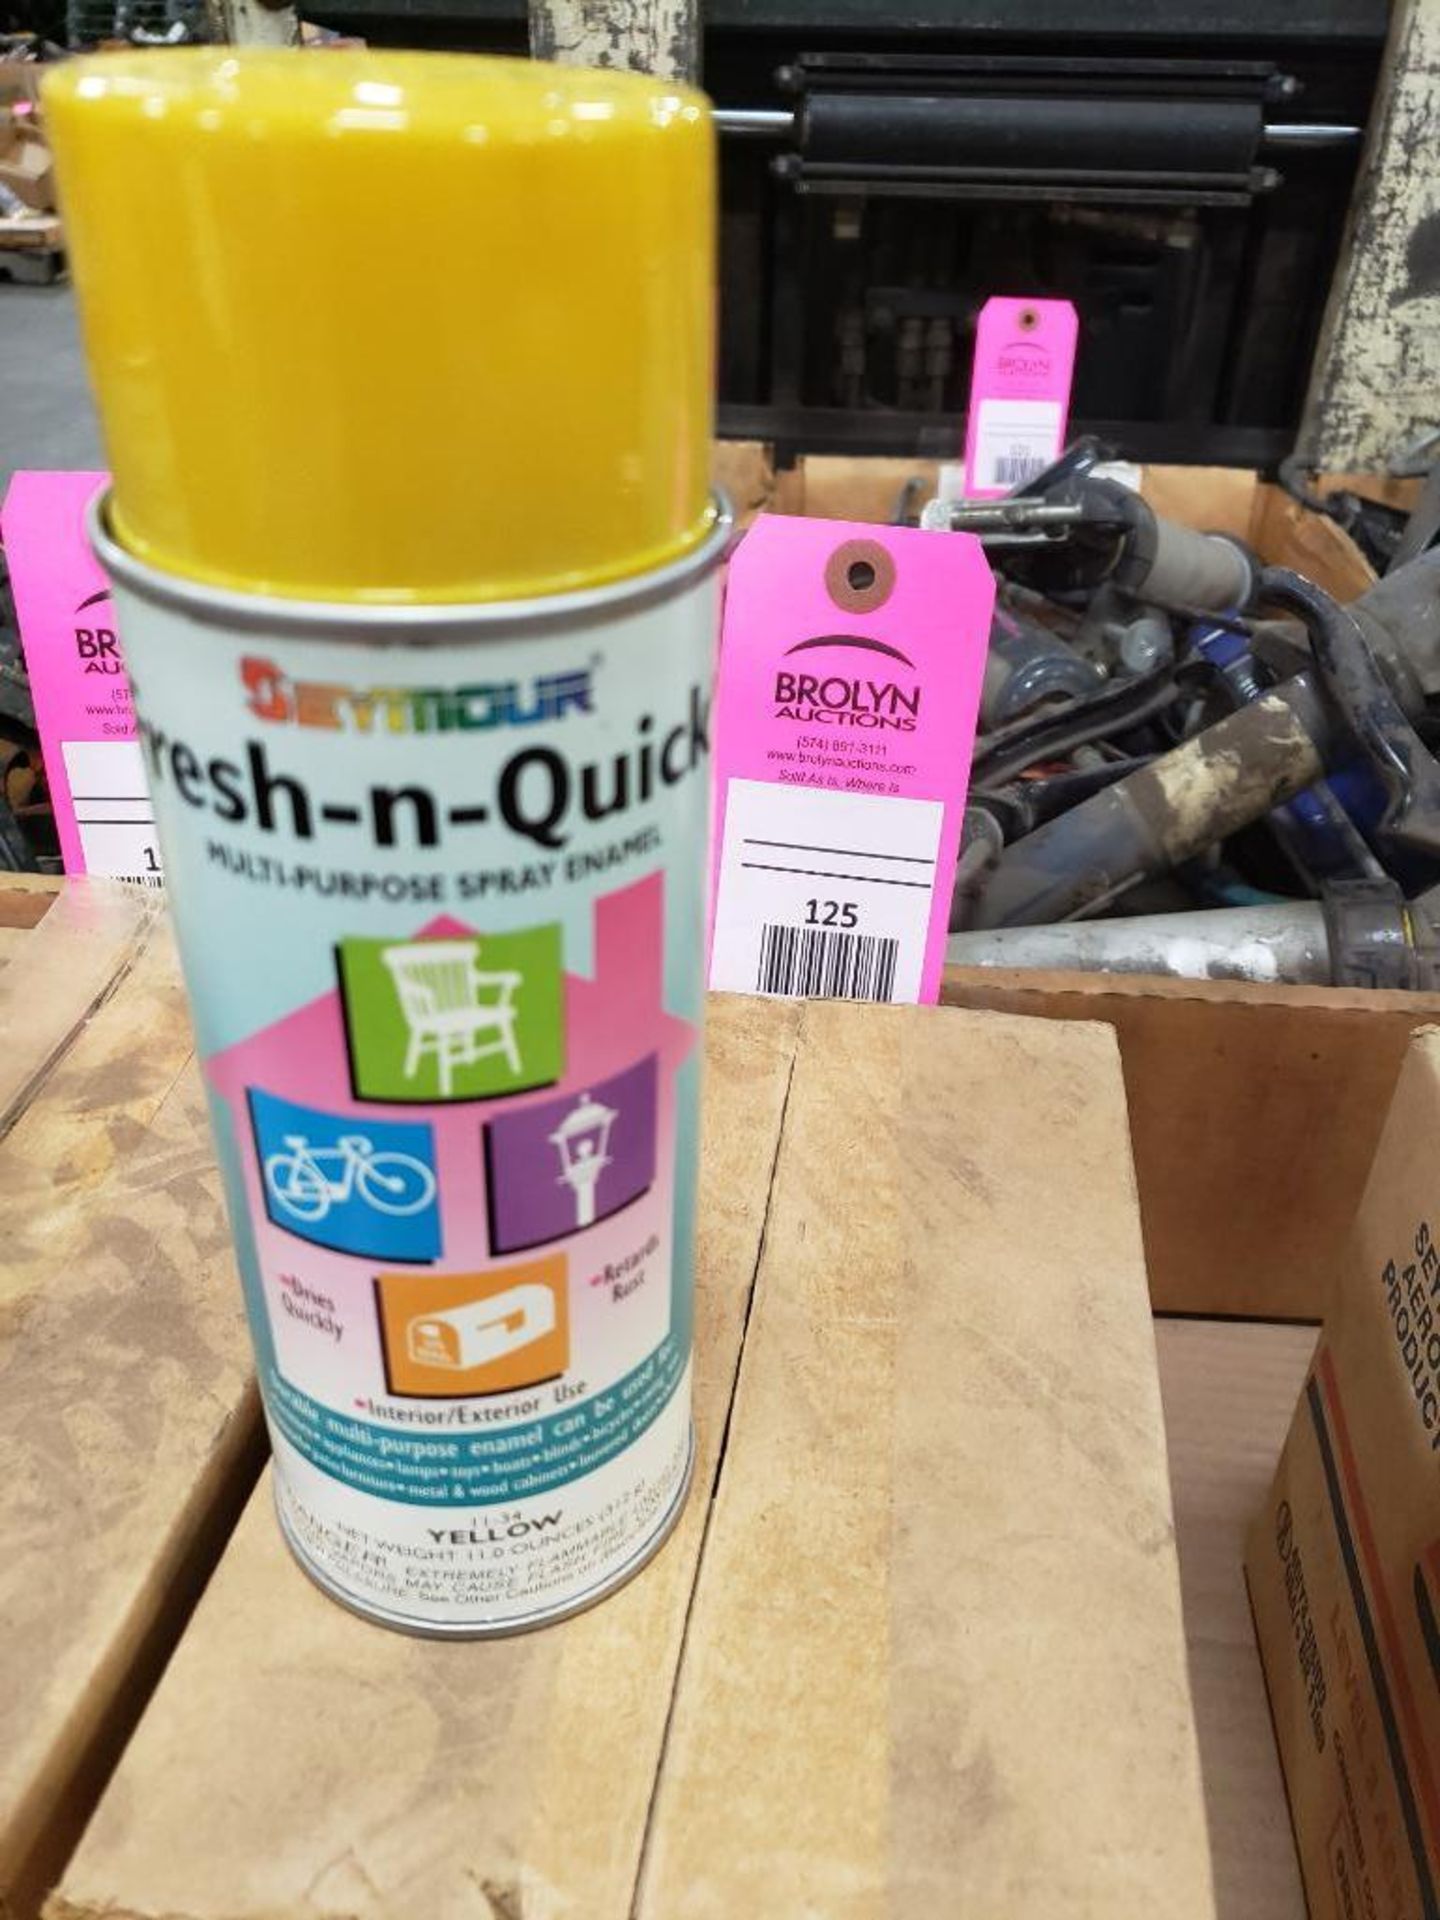 Qty 6 - Fresh and Quick Seymour yellow spray paint. New in case.